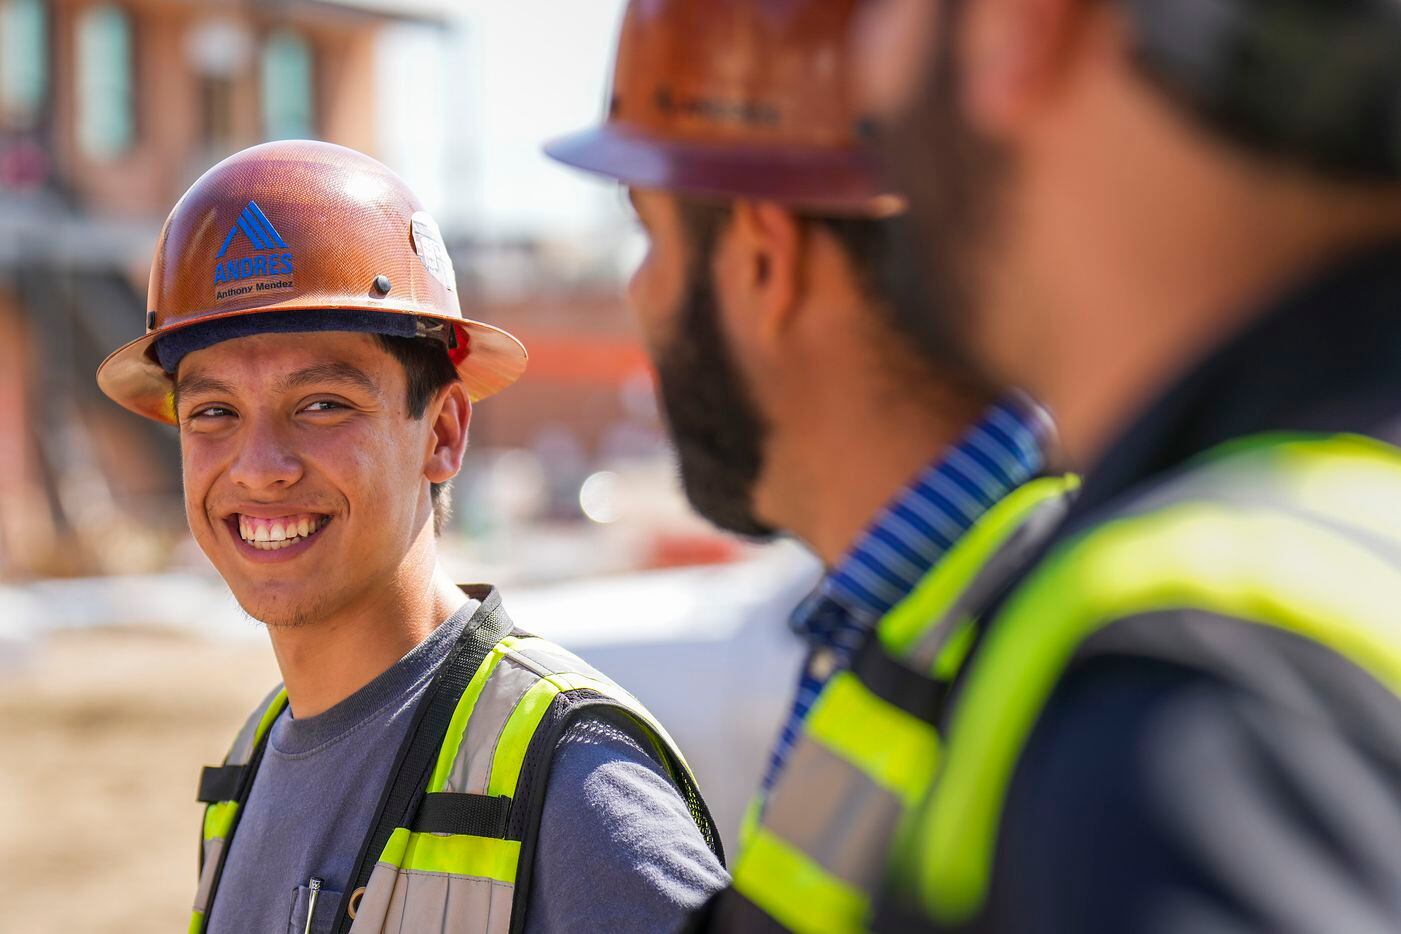 Anthony Mendez (left) talks with Andres Construction co-workers at a job site in Deep Ellum.